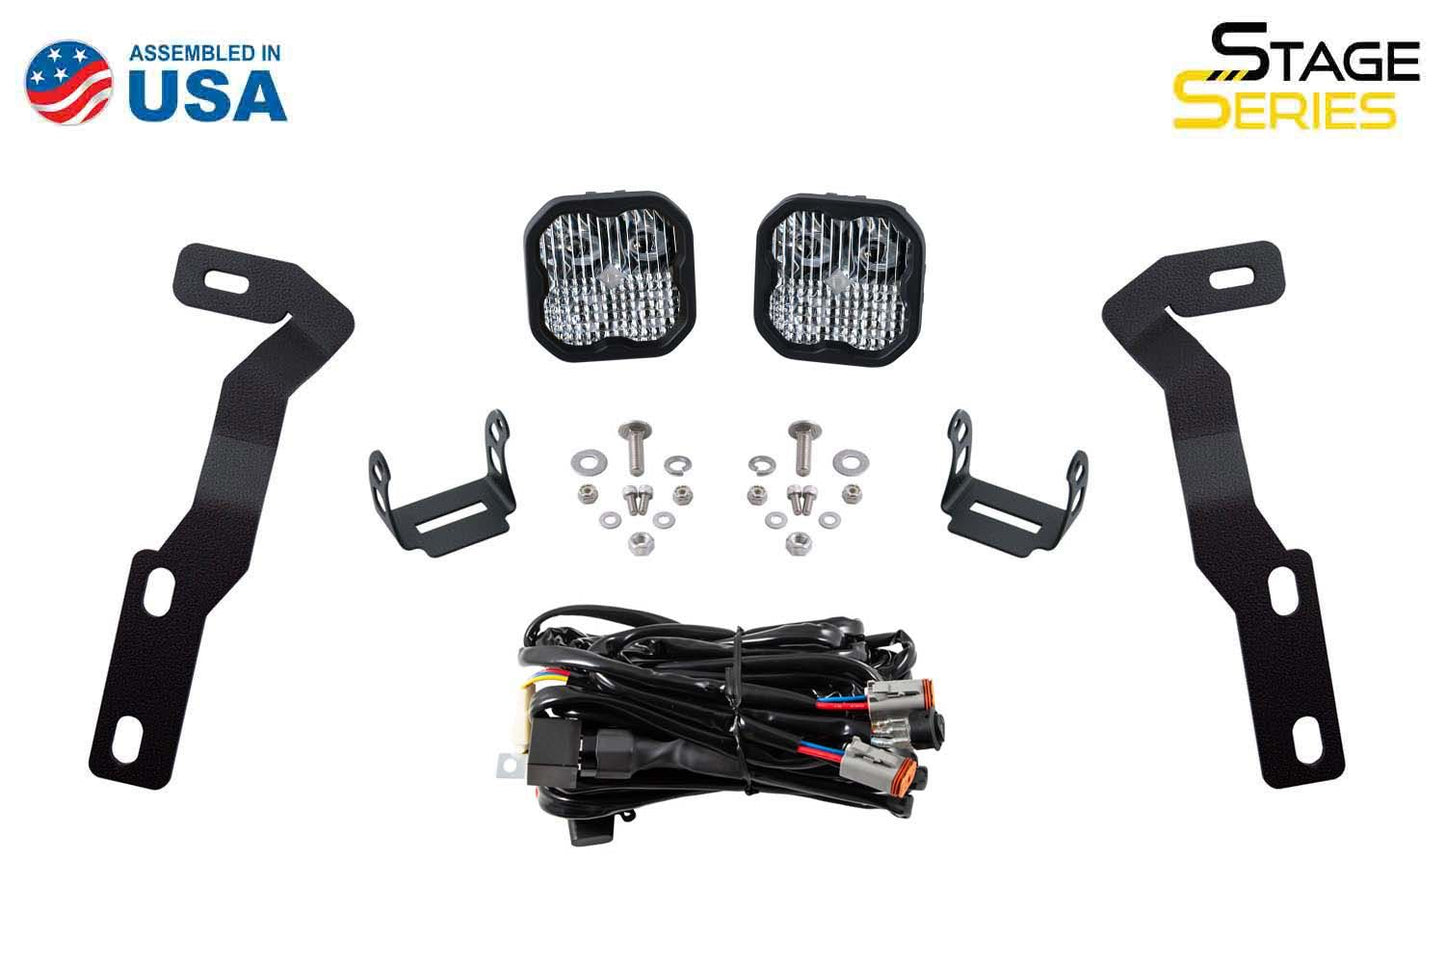 Stage Series Backlit Ditch Light Kit for 2016-2023 Toyota Tacoma